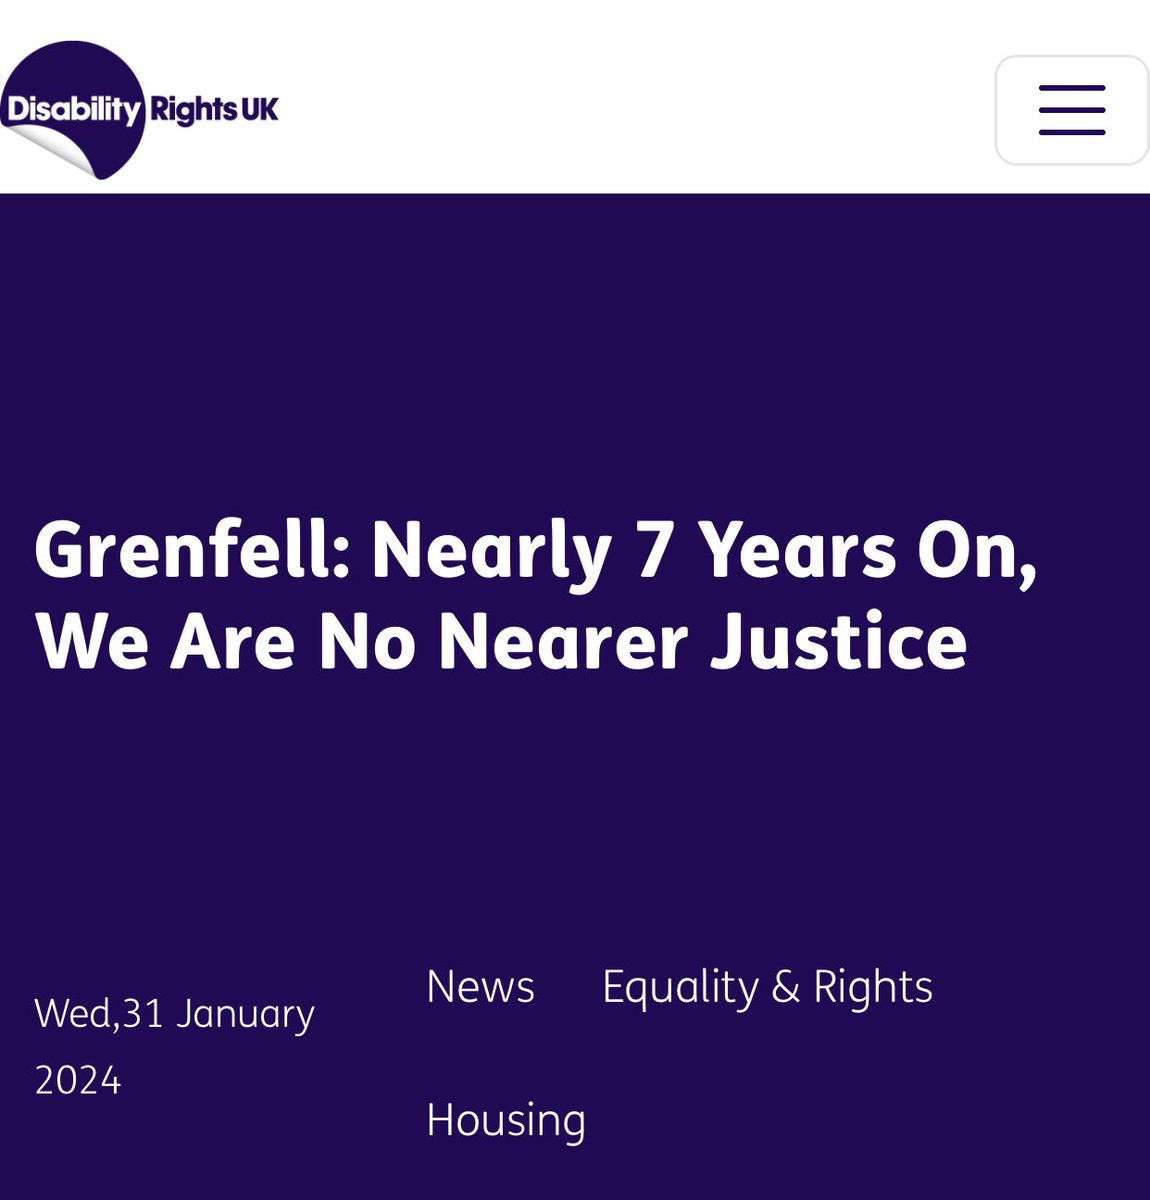 While we’re here,
Remember Shukri Abdi
Remember Grenfell